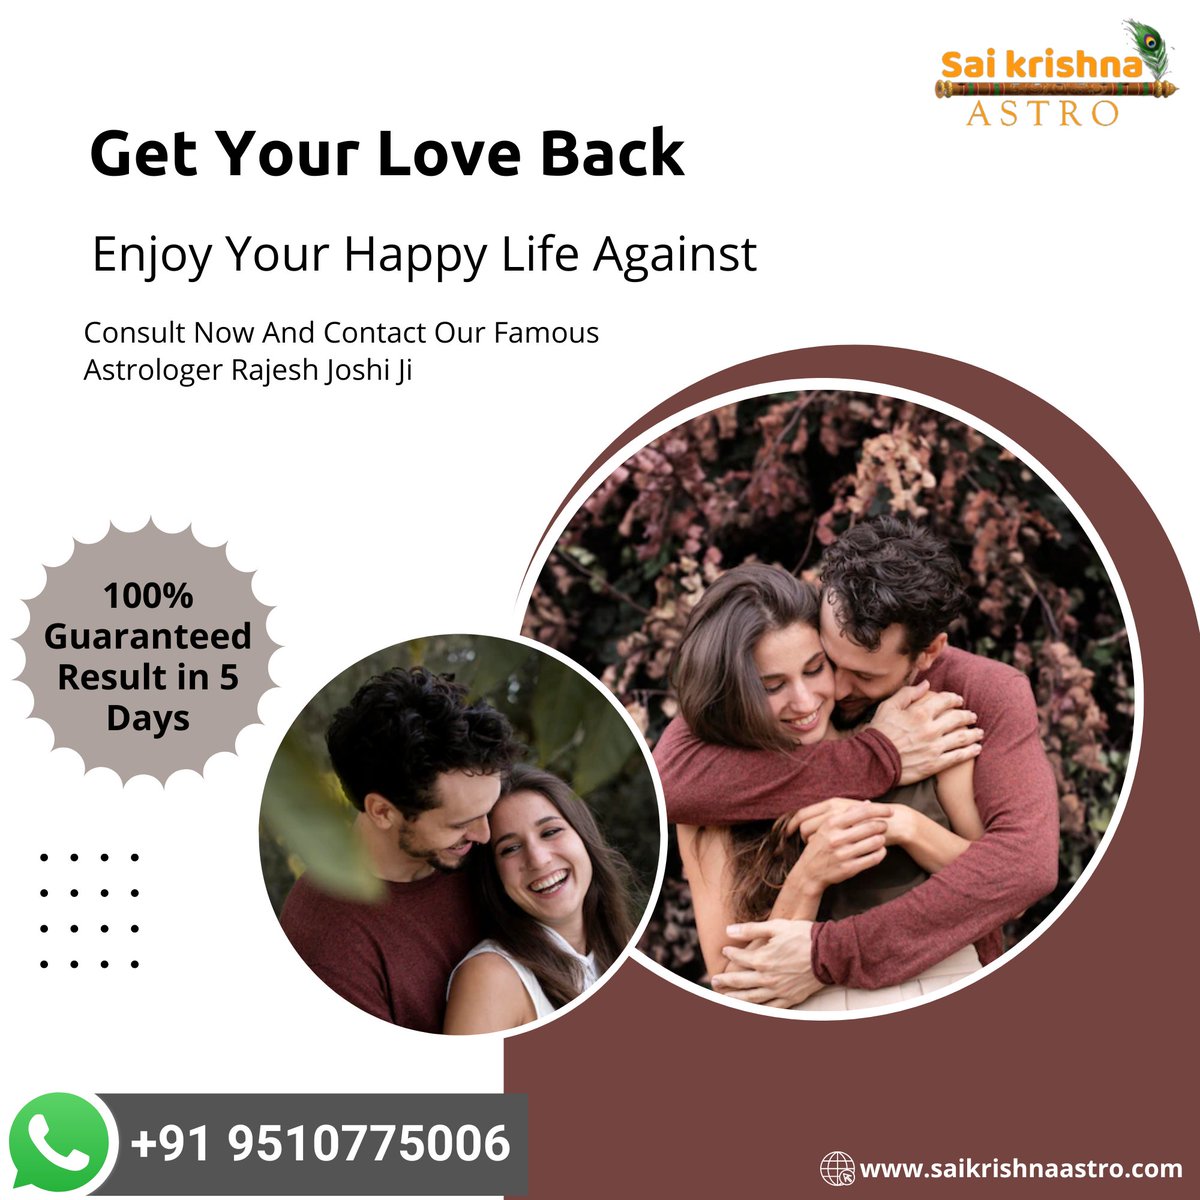 𝗚𝗲𝘁 𝗬𝗼𝘂𝗿 𝗟𝗼𝘃𝗲 𝗕𝗮𝗰𝗸

Enjoy Your Happy Life Against
Consult Now And Contact Our Famous Astrologer Rajesh Joshi Ji

📞 +919510775006

#Marriage #LoveMarriage #MarriageSolution #Astrologer #AstrologyGuidance #RajeshJoshiAstrologer #SaiKrishnaAstro #Ahmedabad #Gujarat